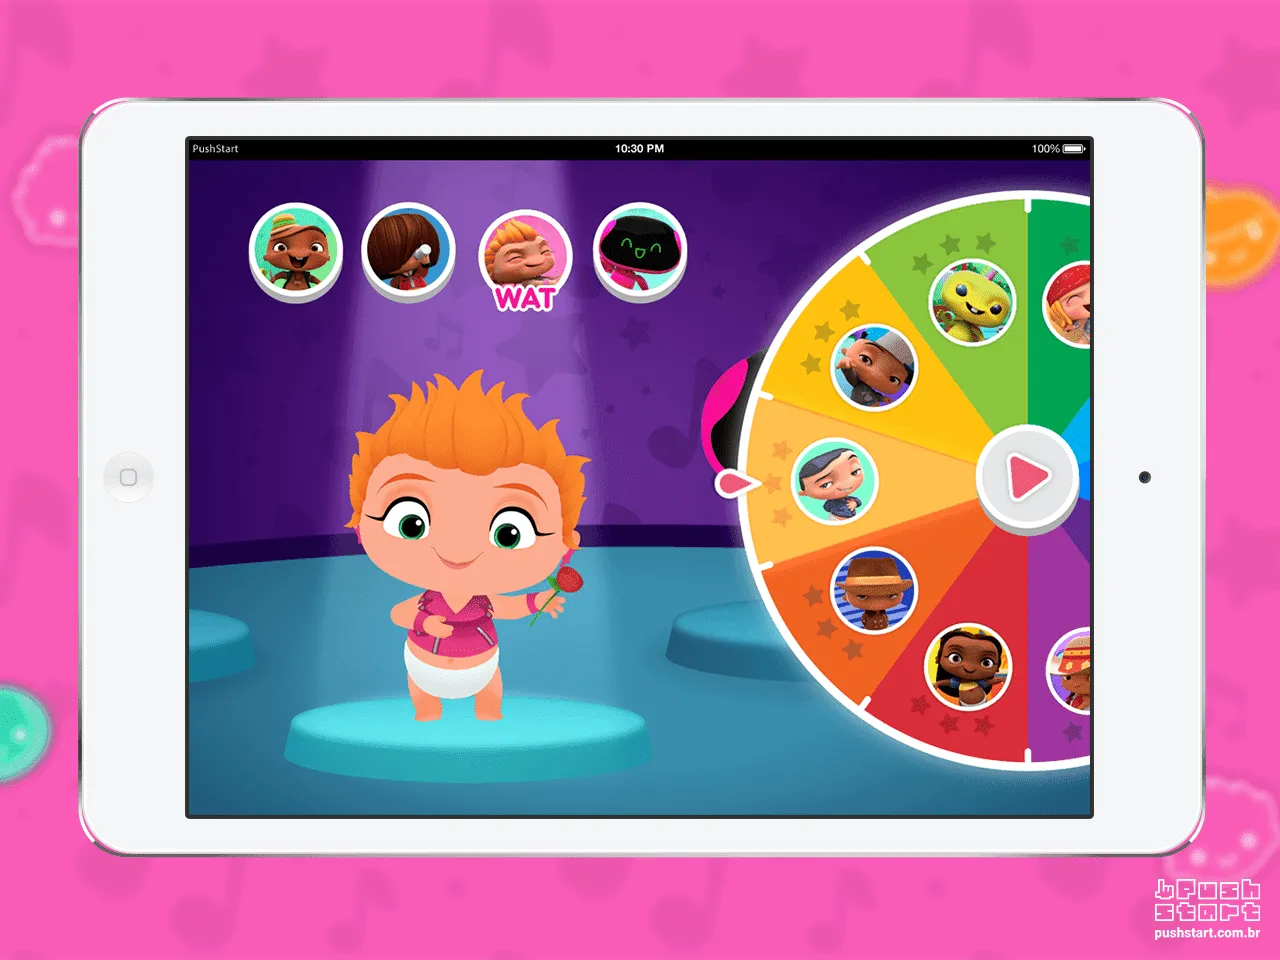 Poject - <p>A game based on Mini Beat Power Rockers, an Argentinian animated show. The player has to hit all dance steps at the right time, in all music styles. <strong>Available on Discovery Kids Plus. </strong></p>